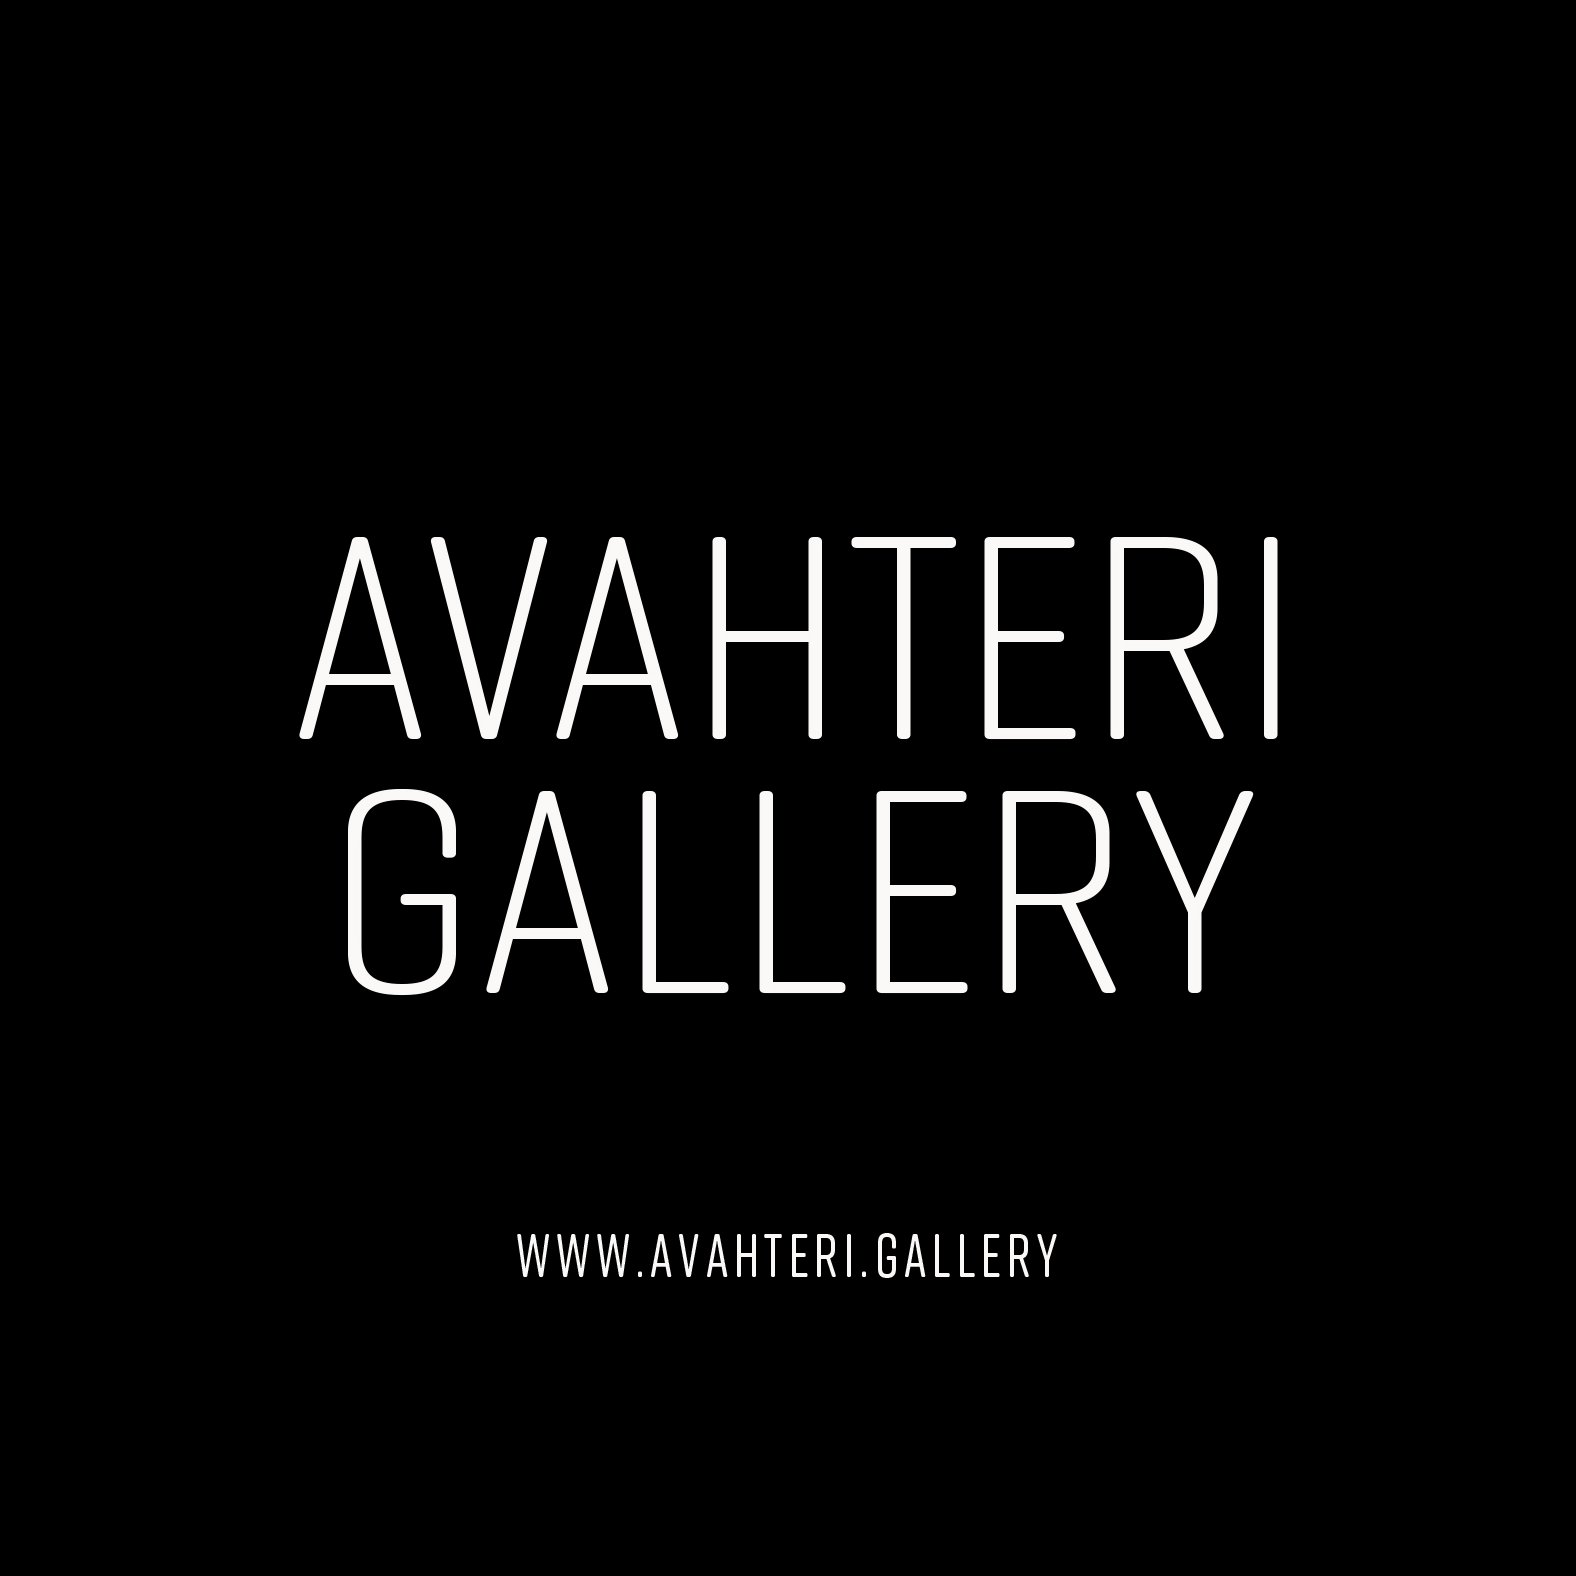 Avahteri Gallery is a platform for creatives to display and promote their works.
Collaborate, Inspire & Learn.